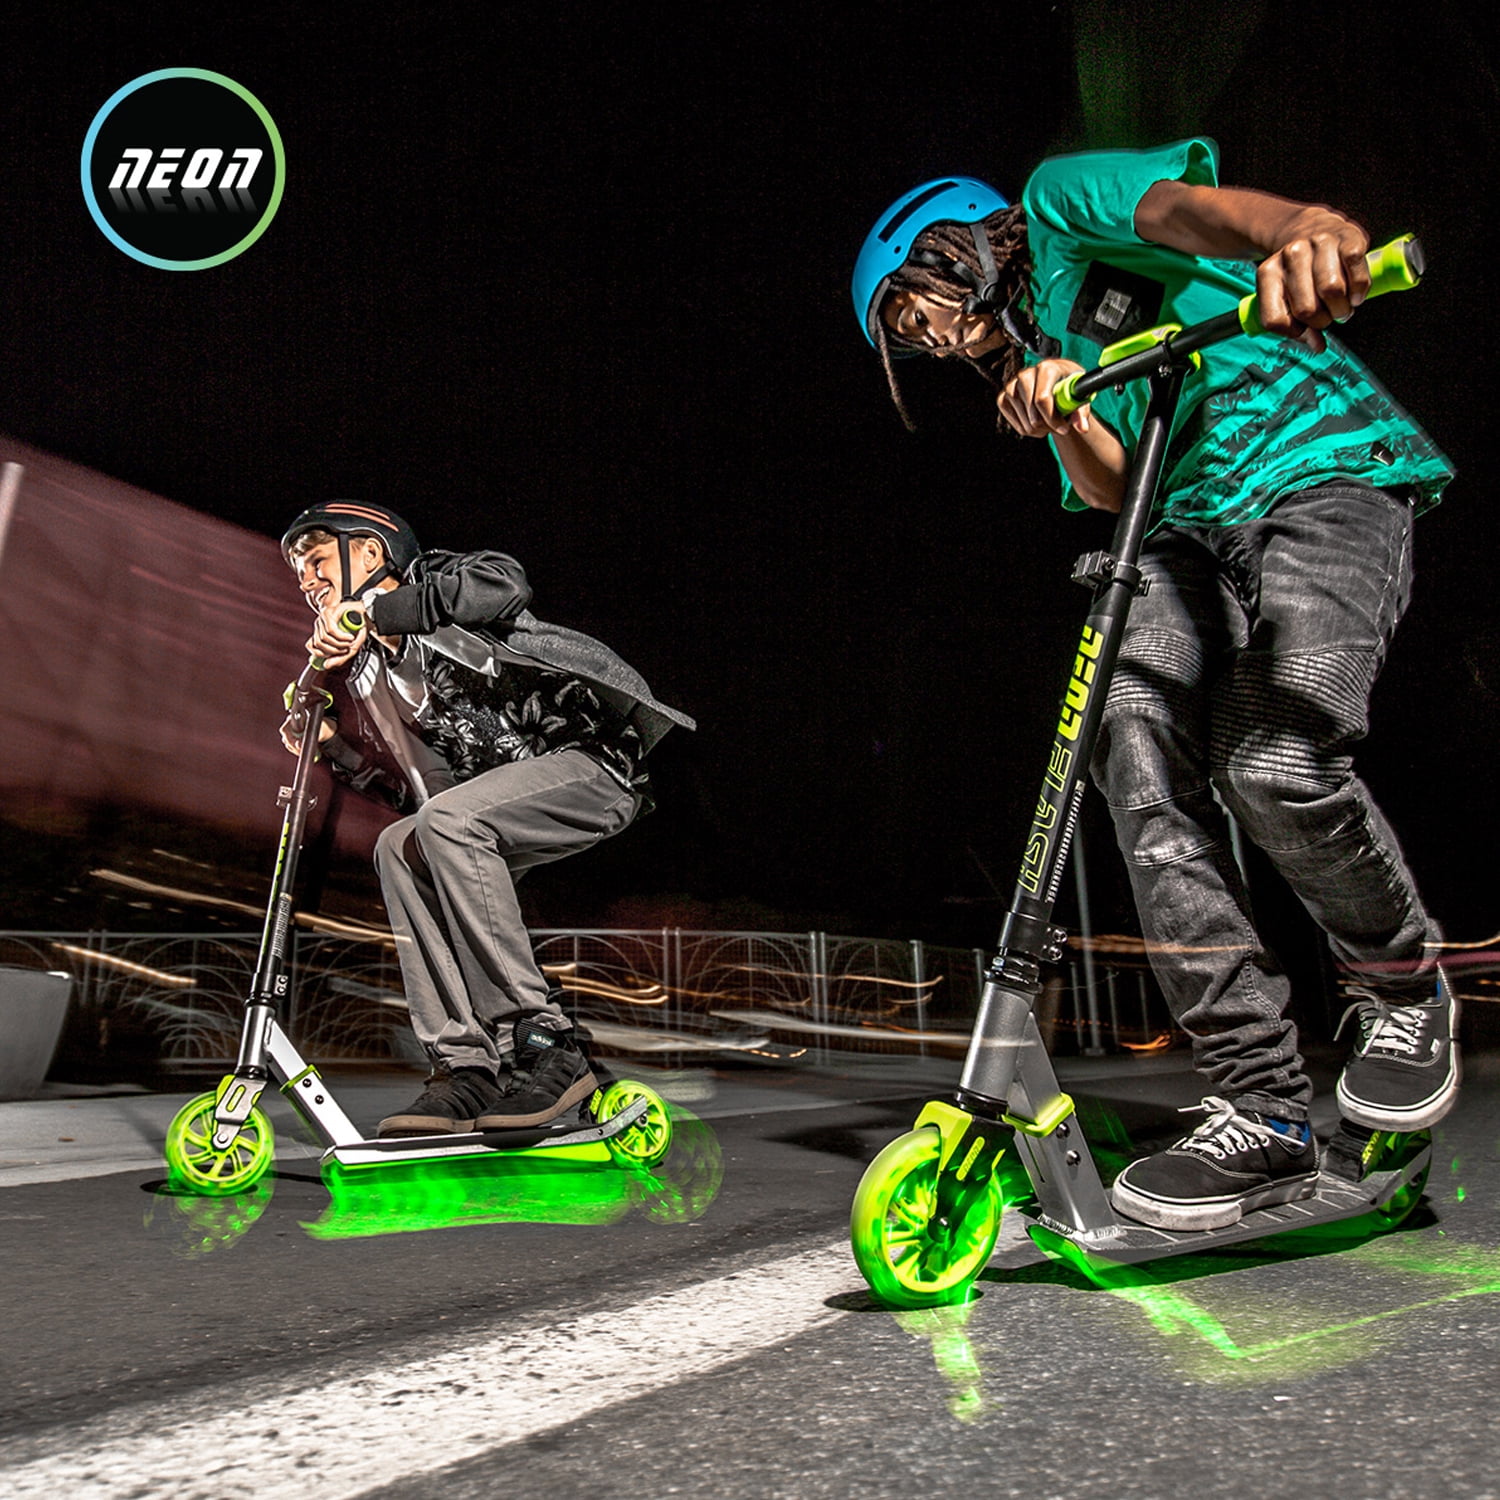 NEON lights up this Christmas season with two new scooter launches